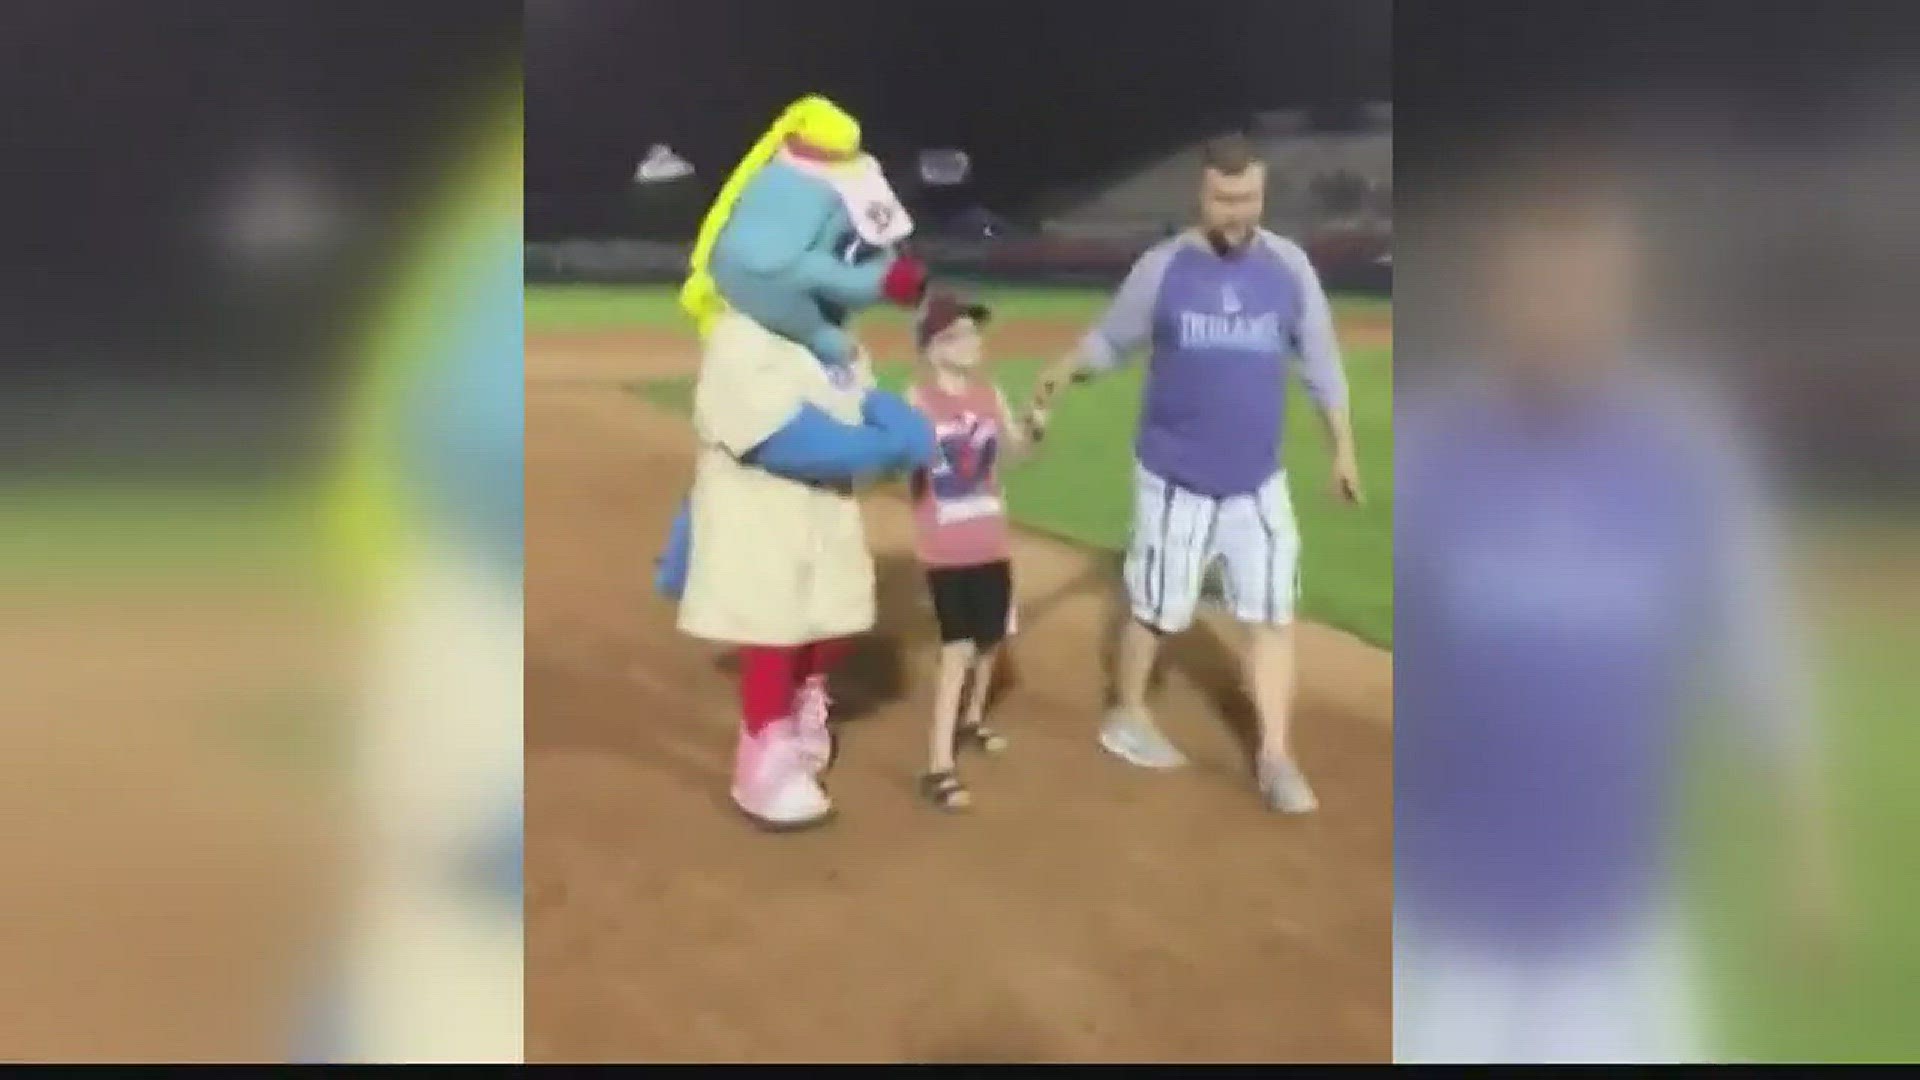 A Spokane boy?s night was made when he got to walk the bases at a Spokane Indians game Thursday night.